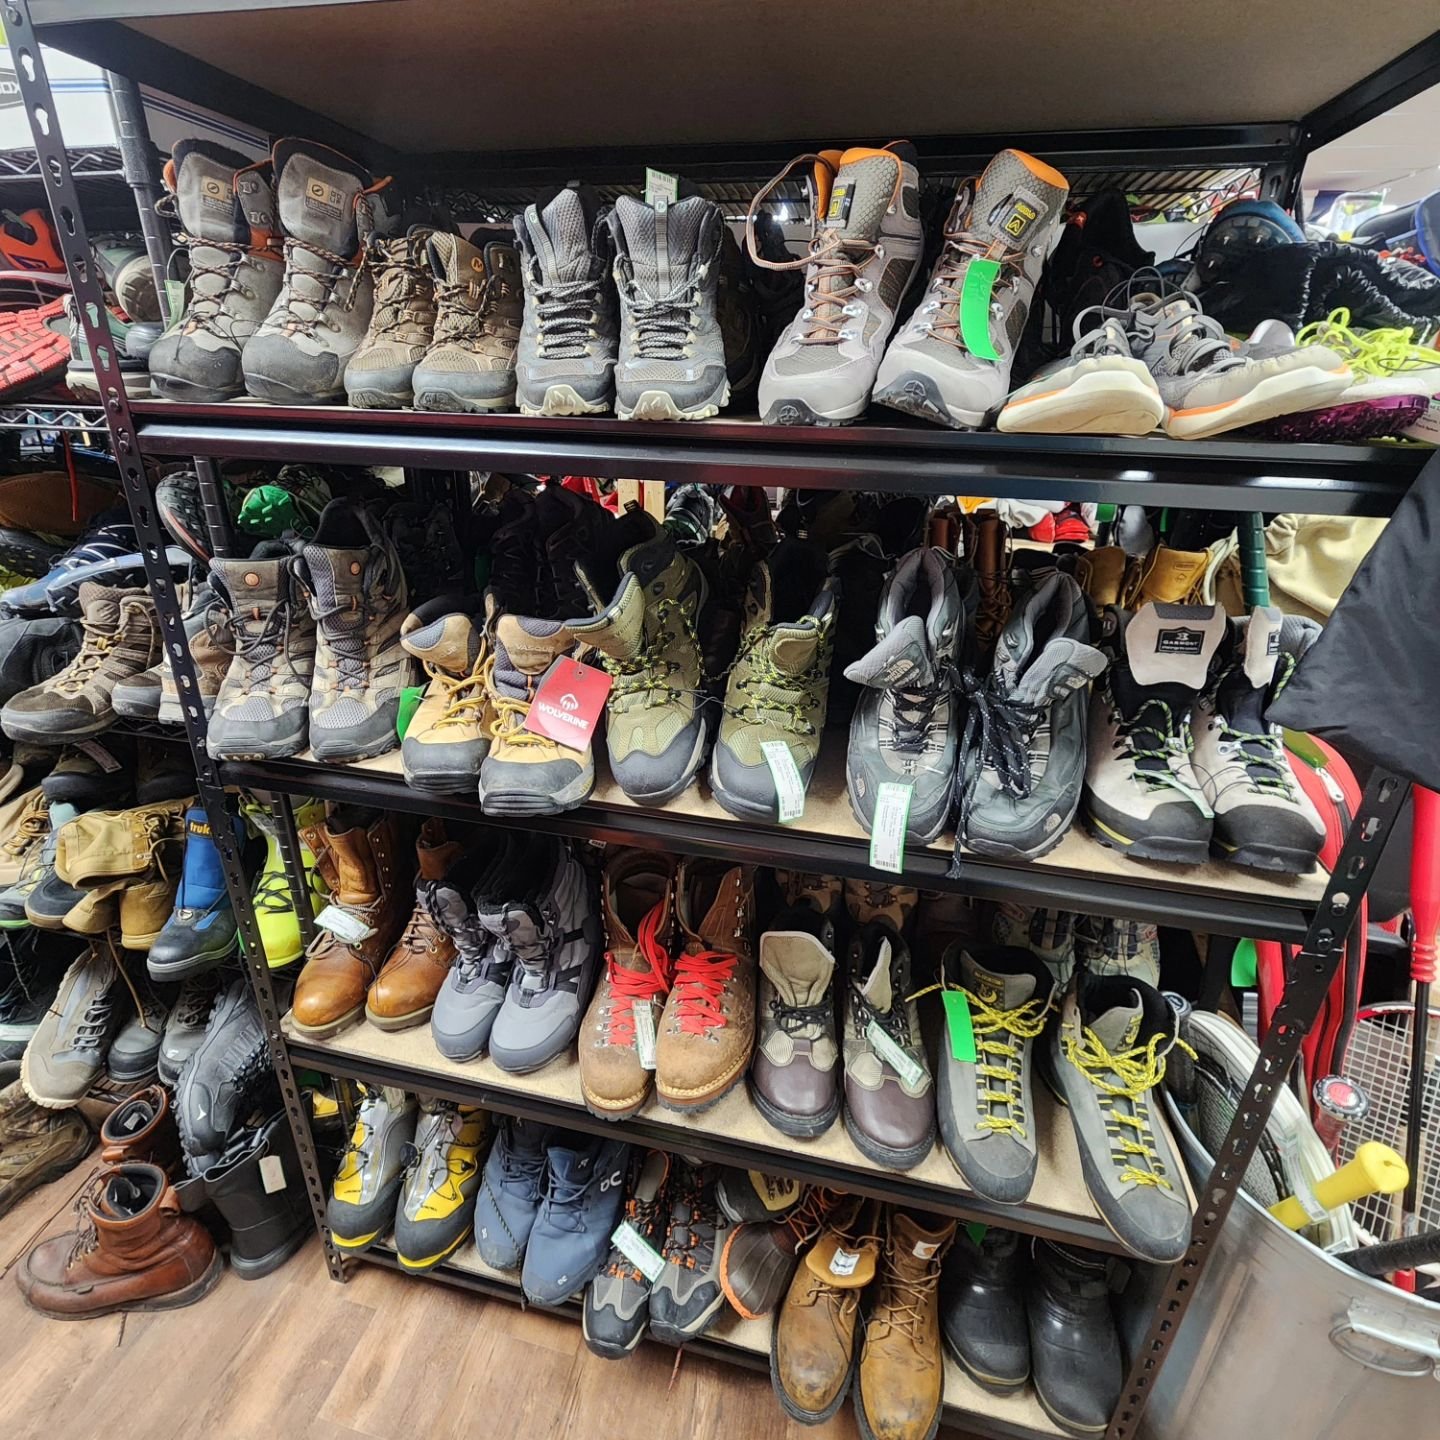 Exploring shoes! Get those hiking shoes out and see where they take you :)
1: NEW wilderness wolverine Men's 13
2. Merrell Men's 9.5
3. Asolo landscape GV MM Men's 7.5
4. Columbia omni-heat women's 7.5
5. Ahnu waterproof women's 7

#fortcollins #fort